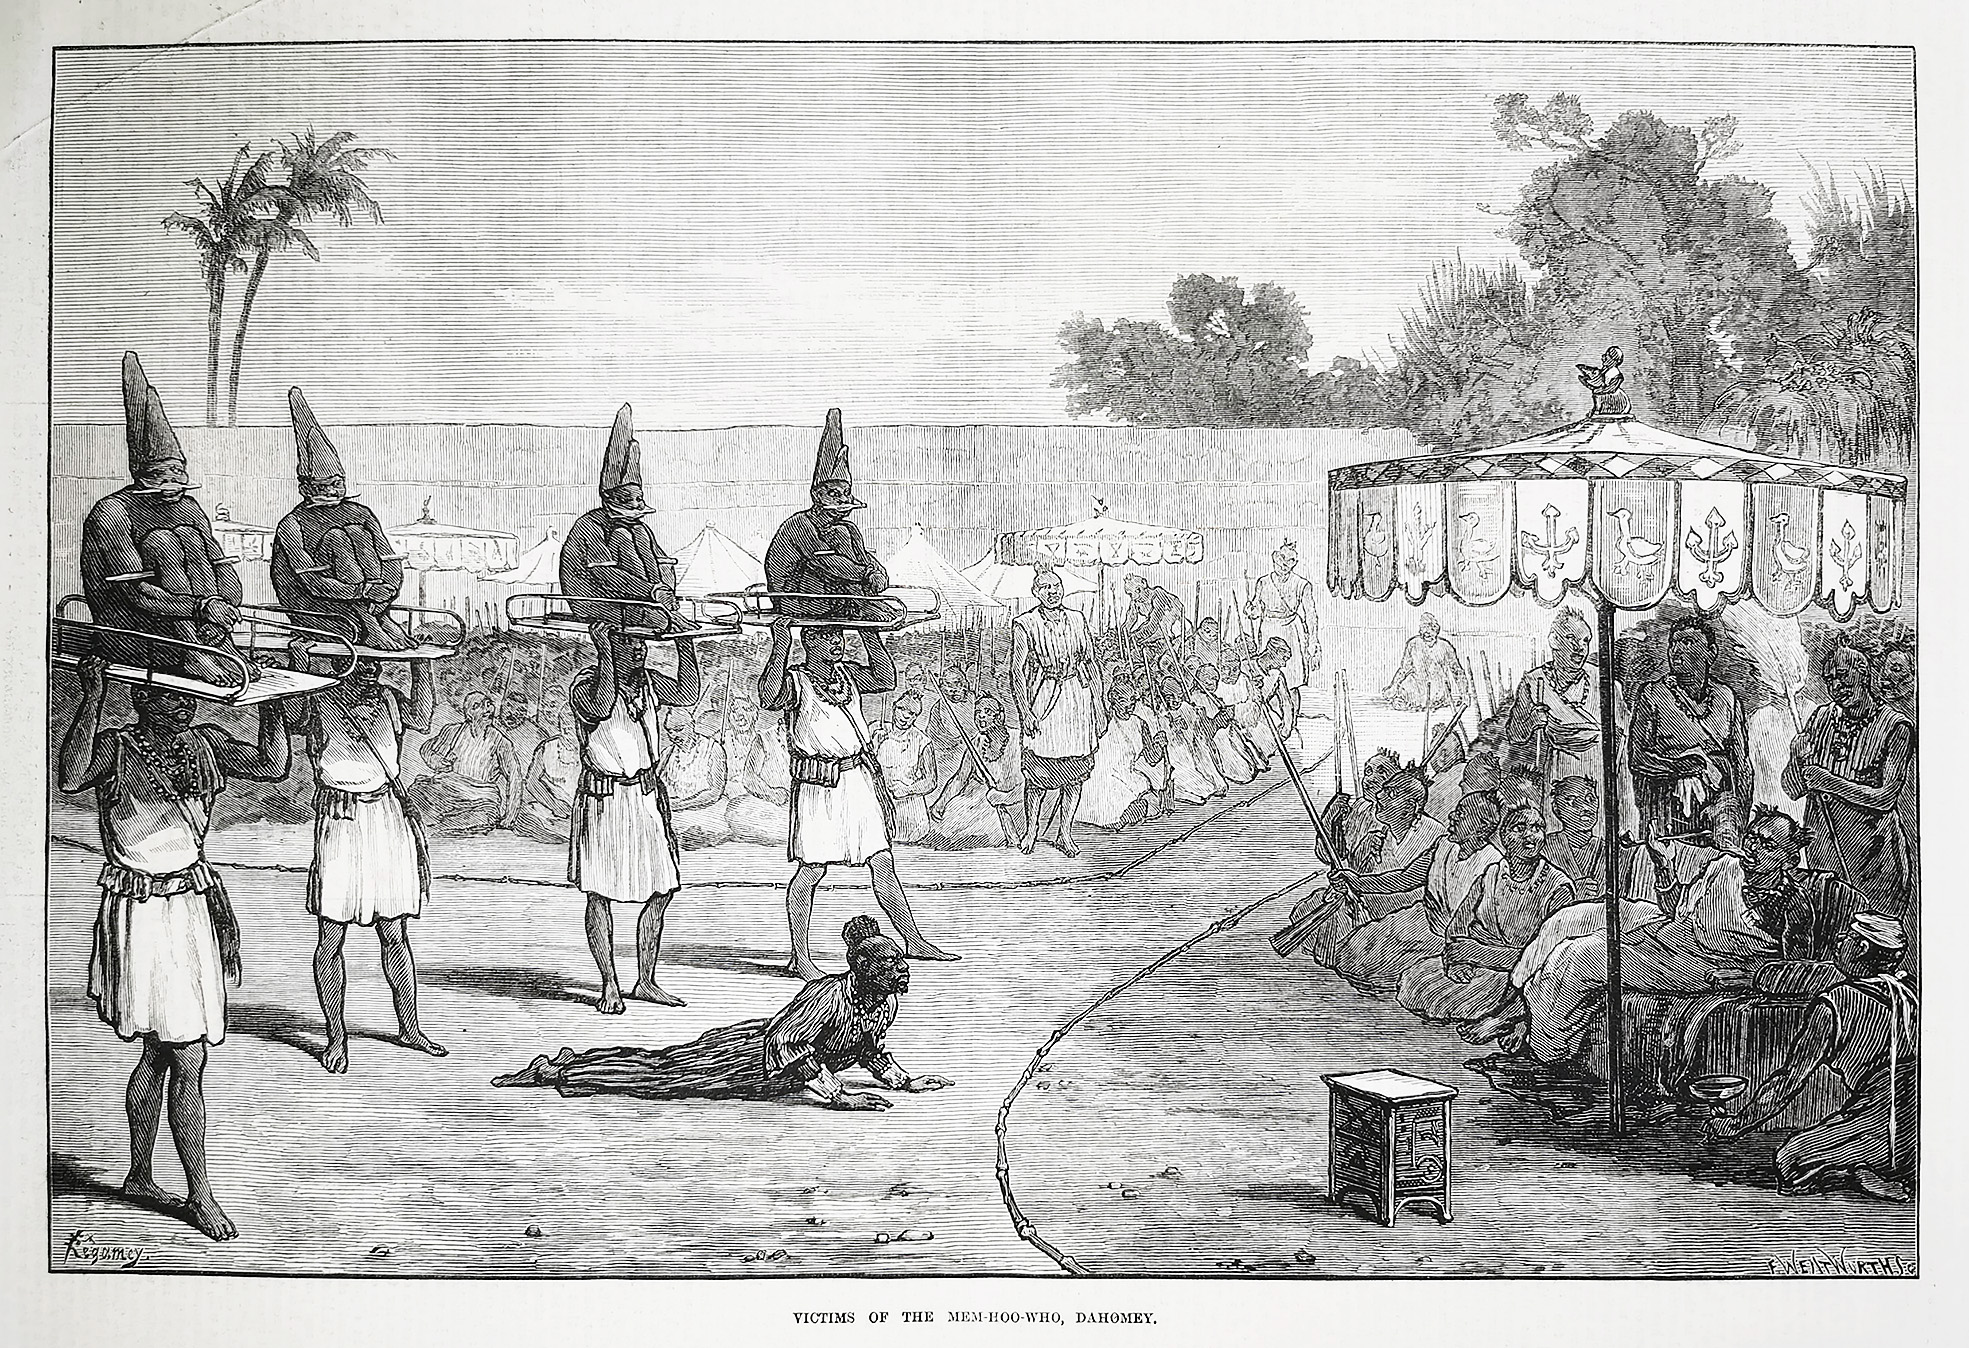 Victms of the Mem-hoo-who, Dahomey. - Antique Print from 1873